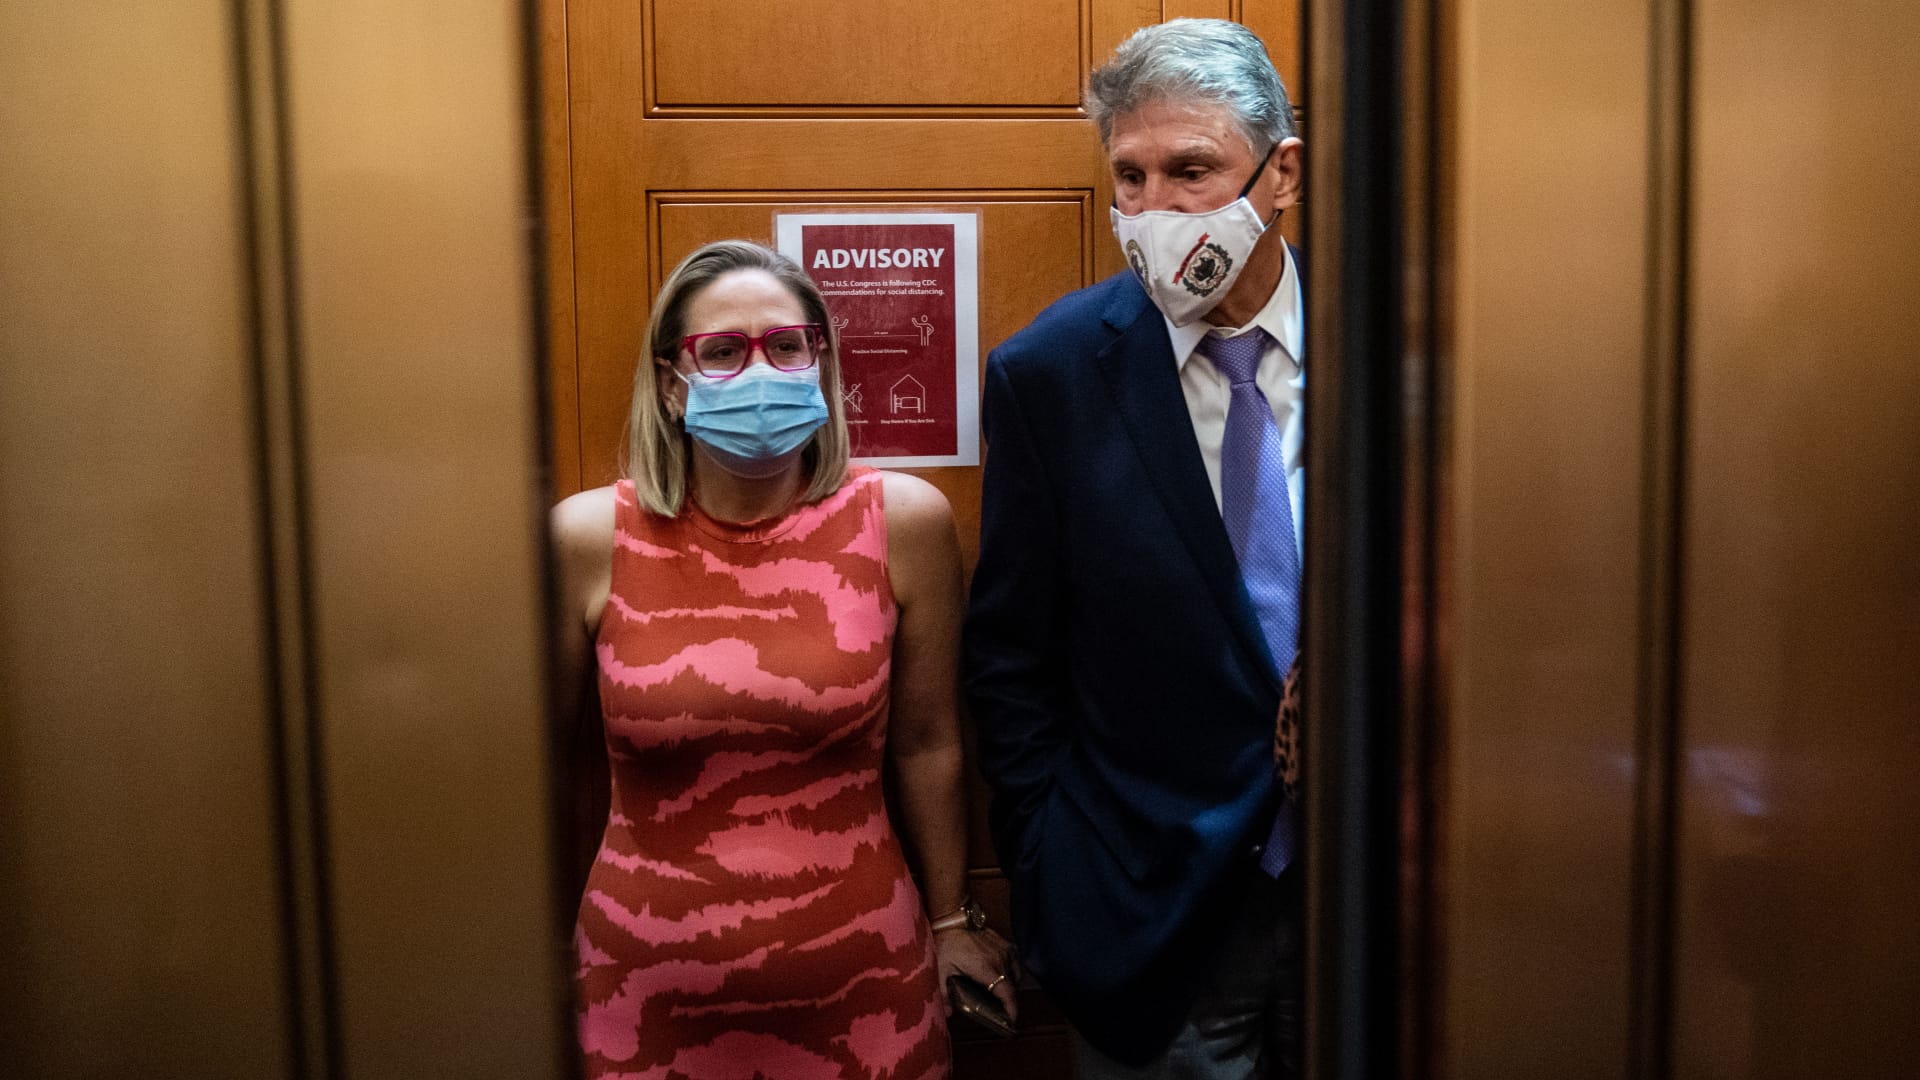 Sen. Kyrsten Sinema, D-Ariz., and Sen. Joe Manchin, D-W.Va., board an elevator after a private meeting between the two of them on Capitol Hill on Thursday, Sept. 30, 2021 in Washington, DC.